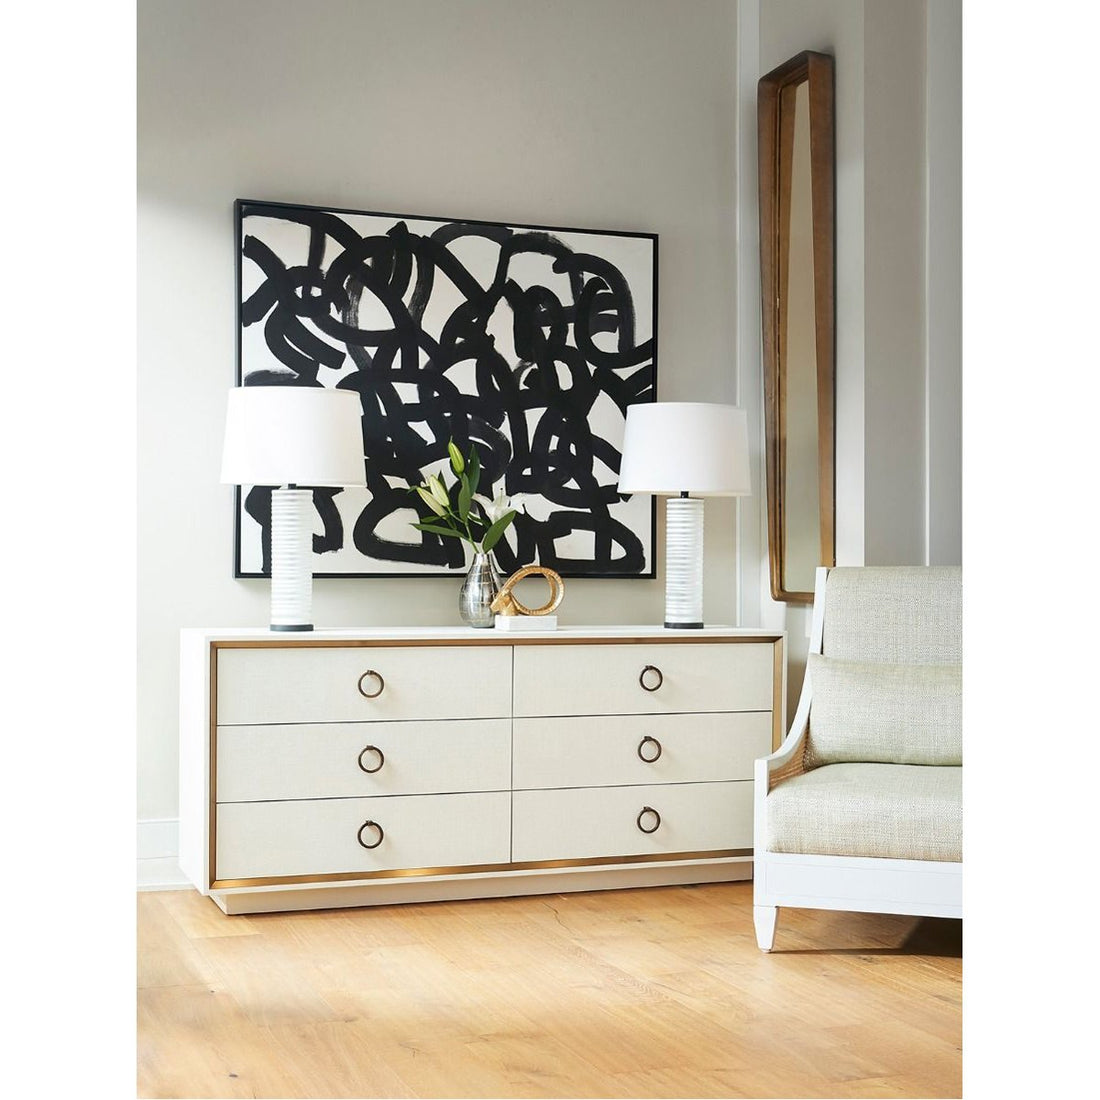 Villa & House Ansel Extra Large 6-Drawer Dresser with Kelley Pull